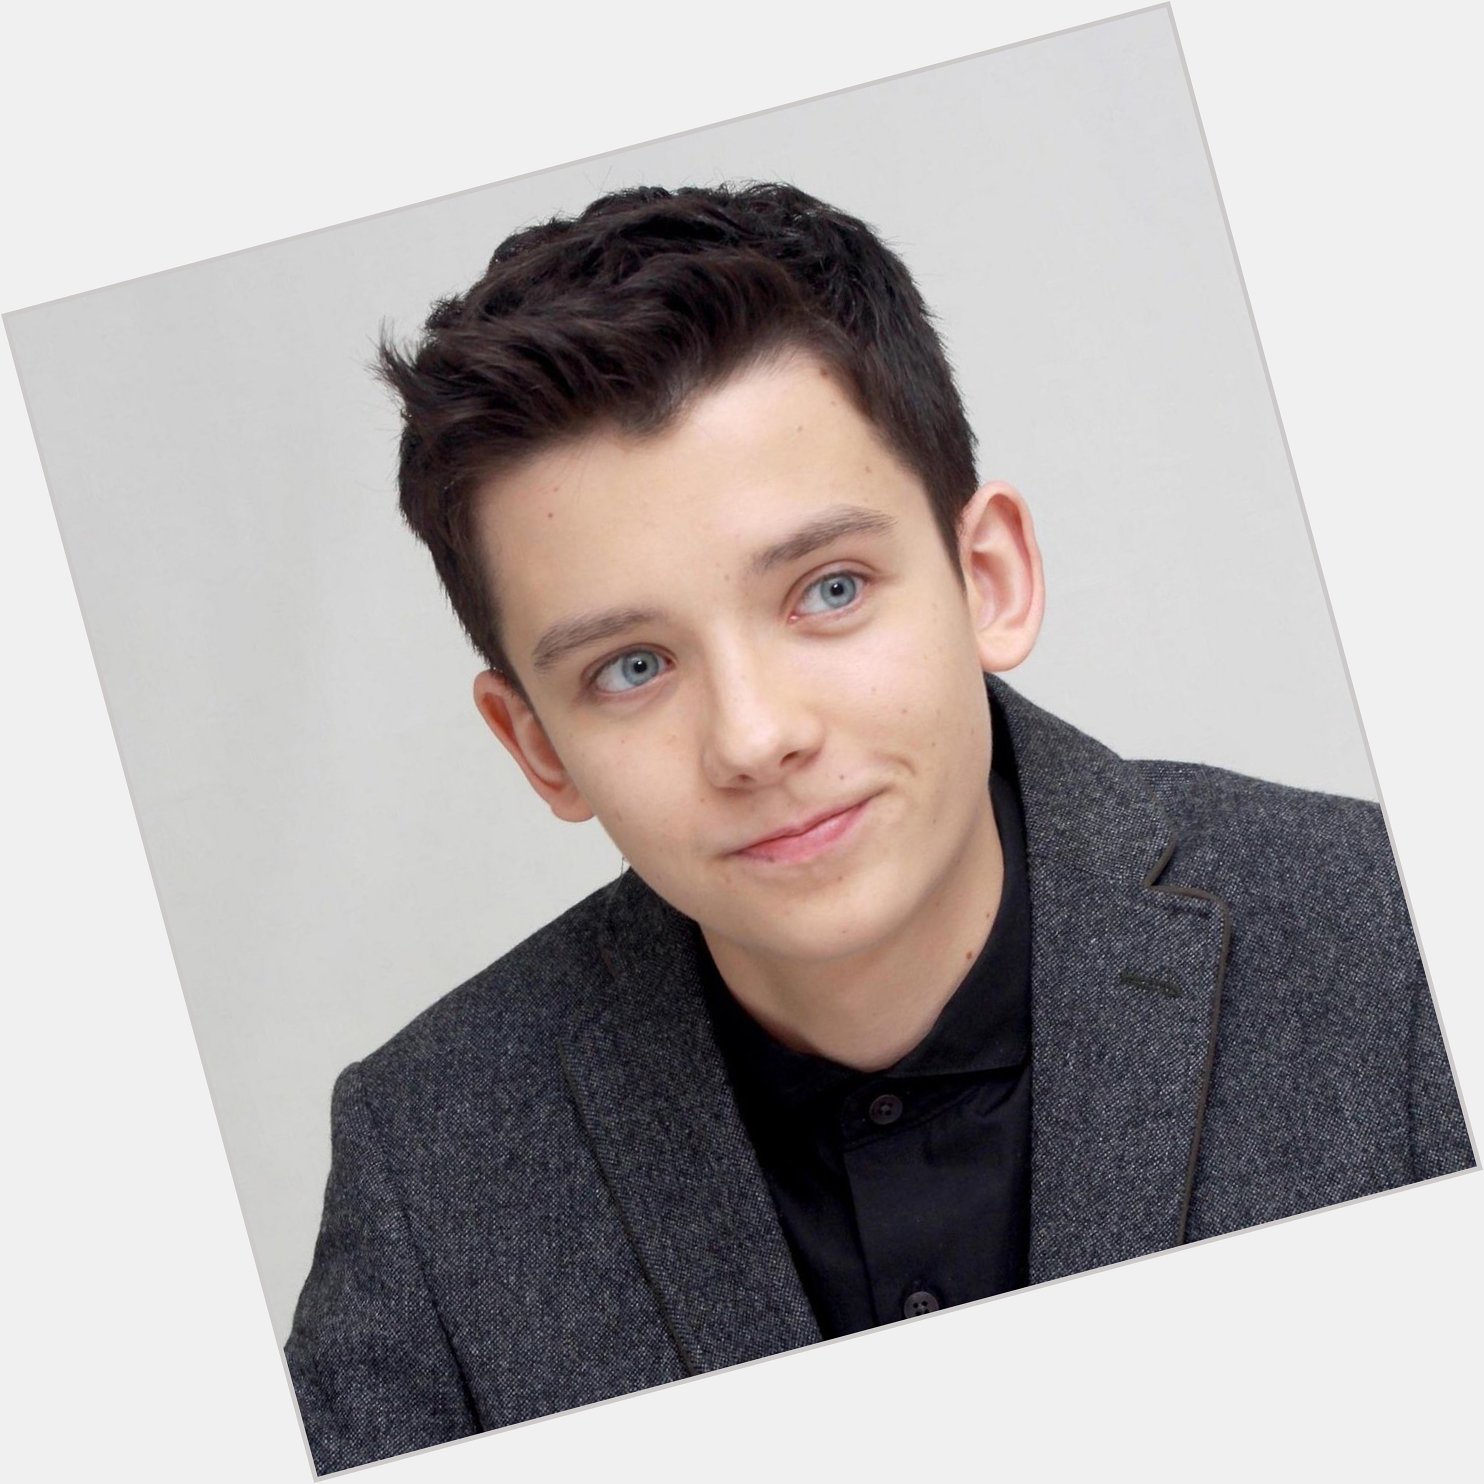 Happy Birthday to the very talented Asa Butterfield! 